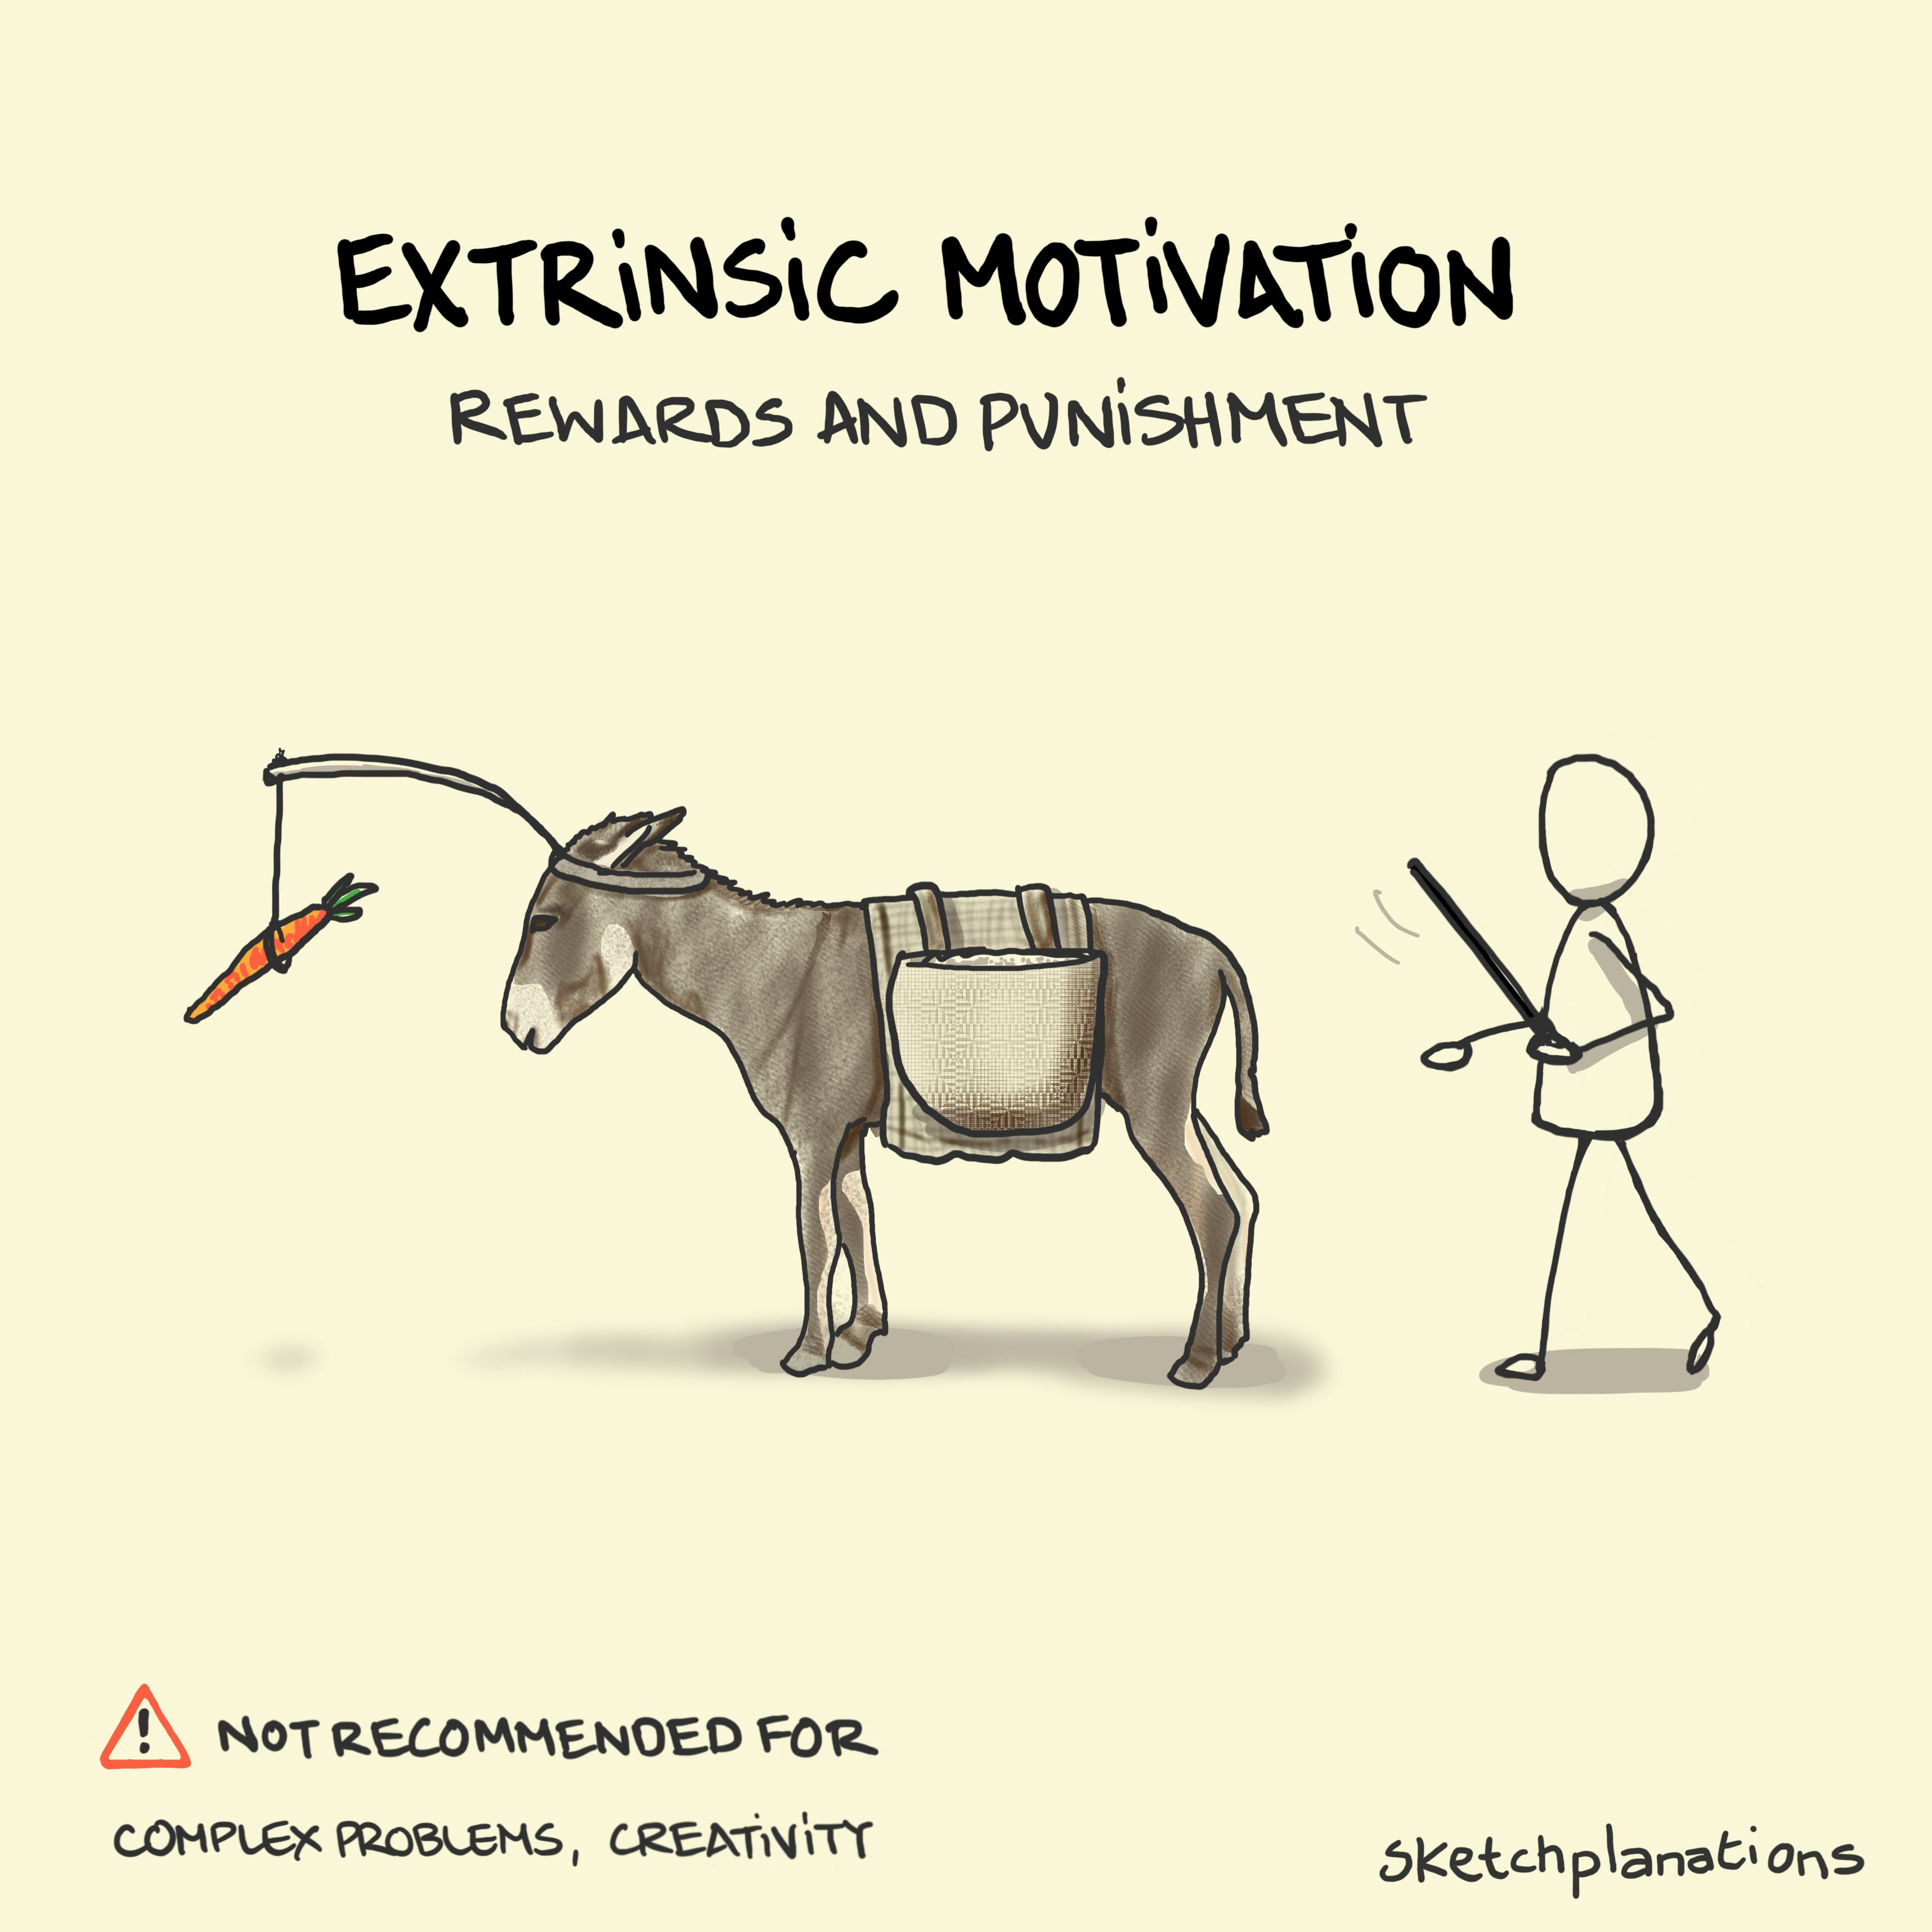 A sketch of extrinsic motivation with a donkey being followed by a man with a stick and in turn following a carrot that's strapped always just out of reach